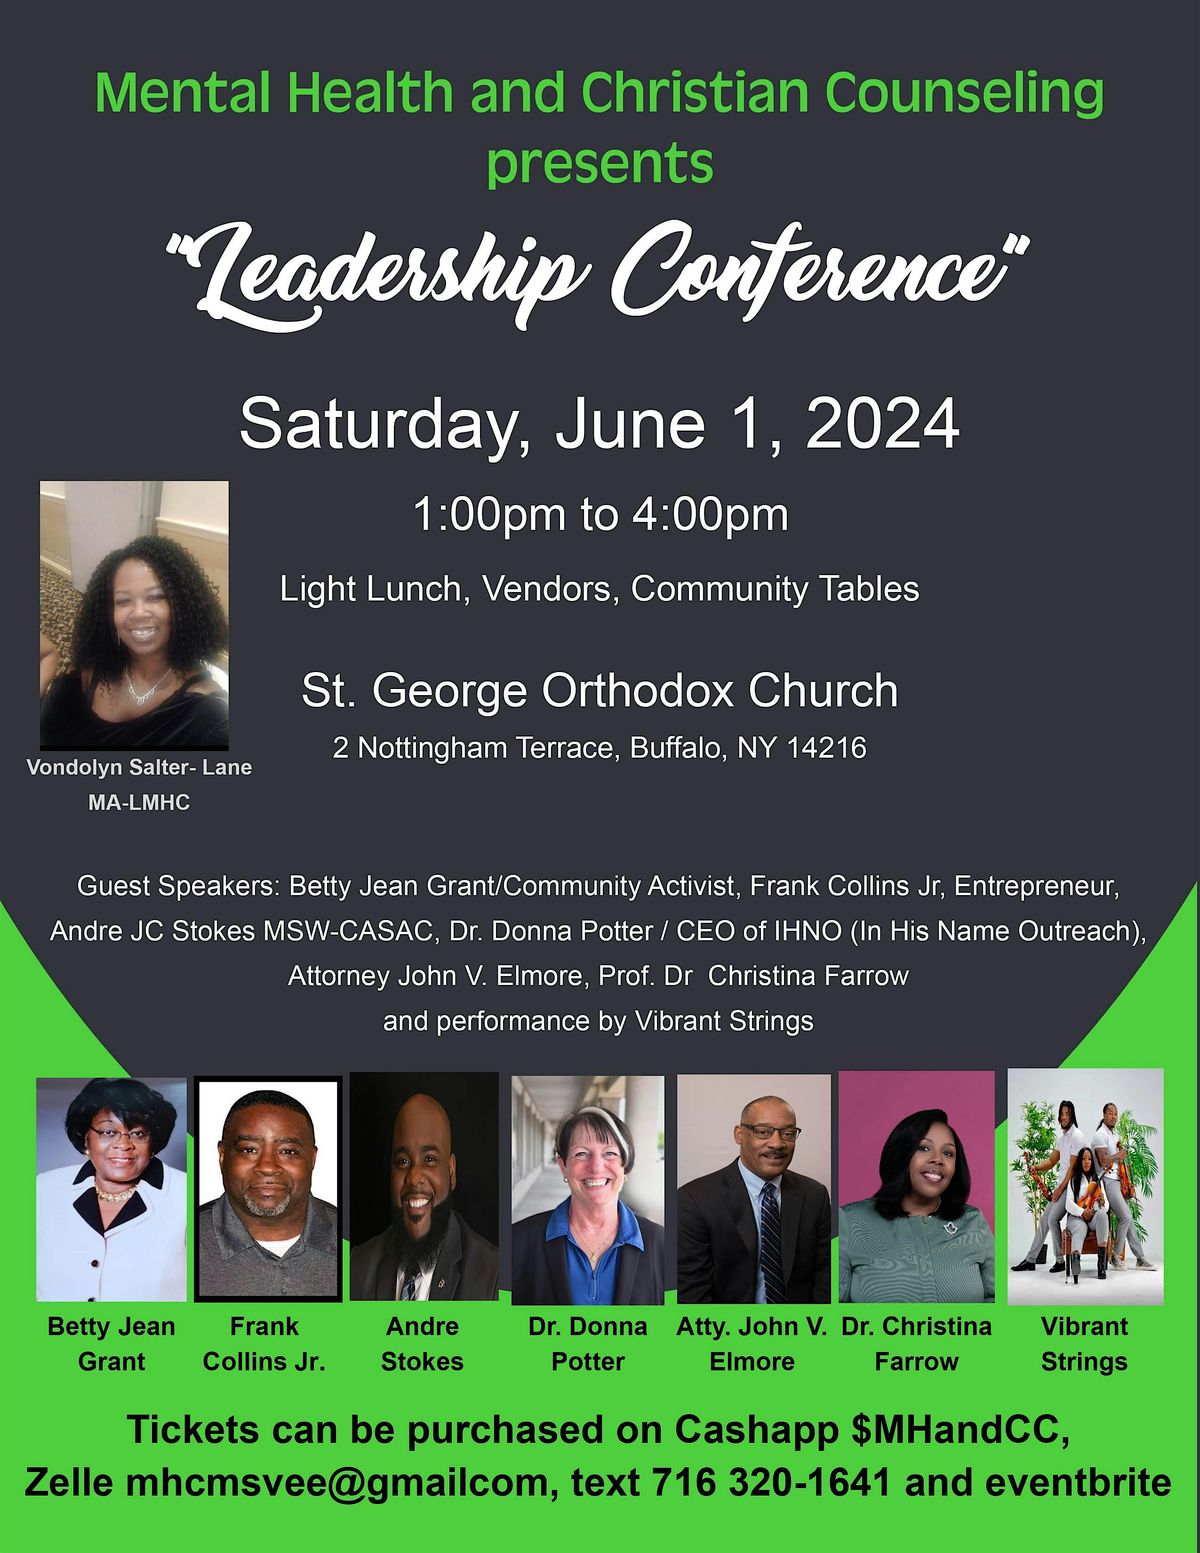 Mental Health and Christian Counseling presents "Leadership Conference"